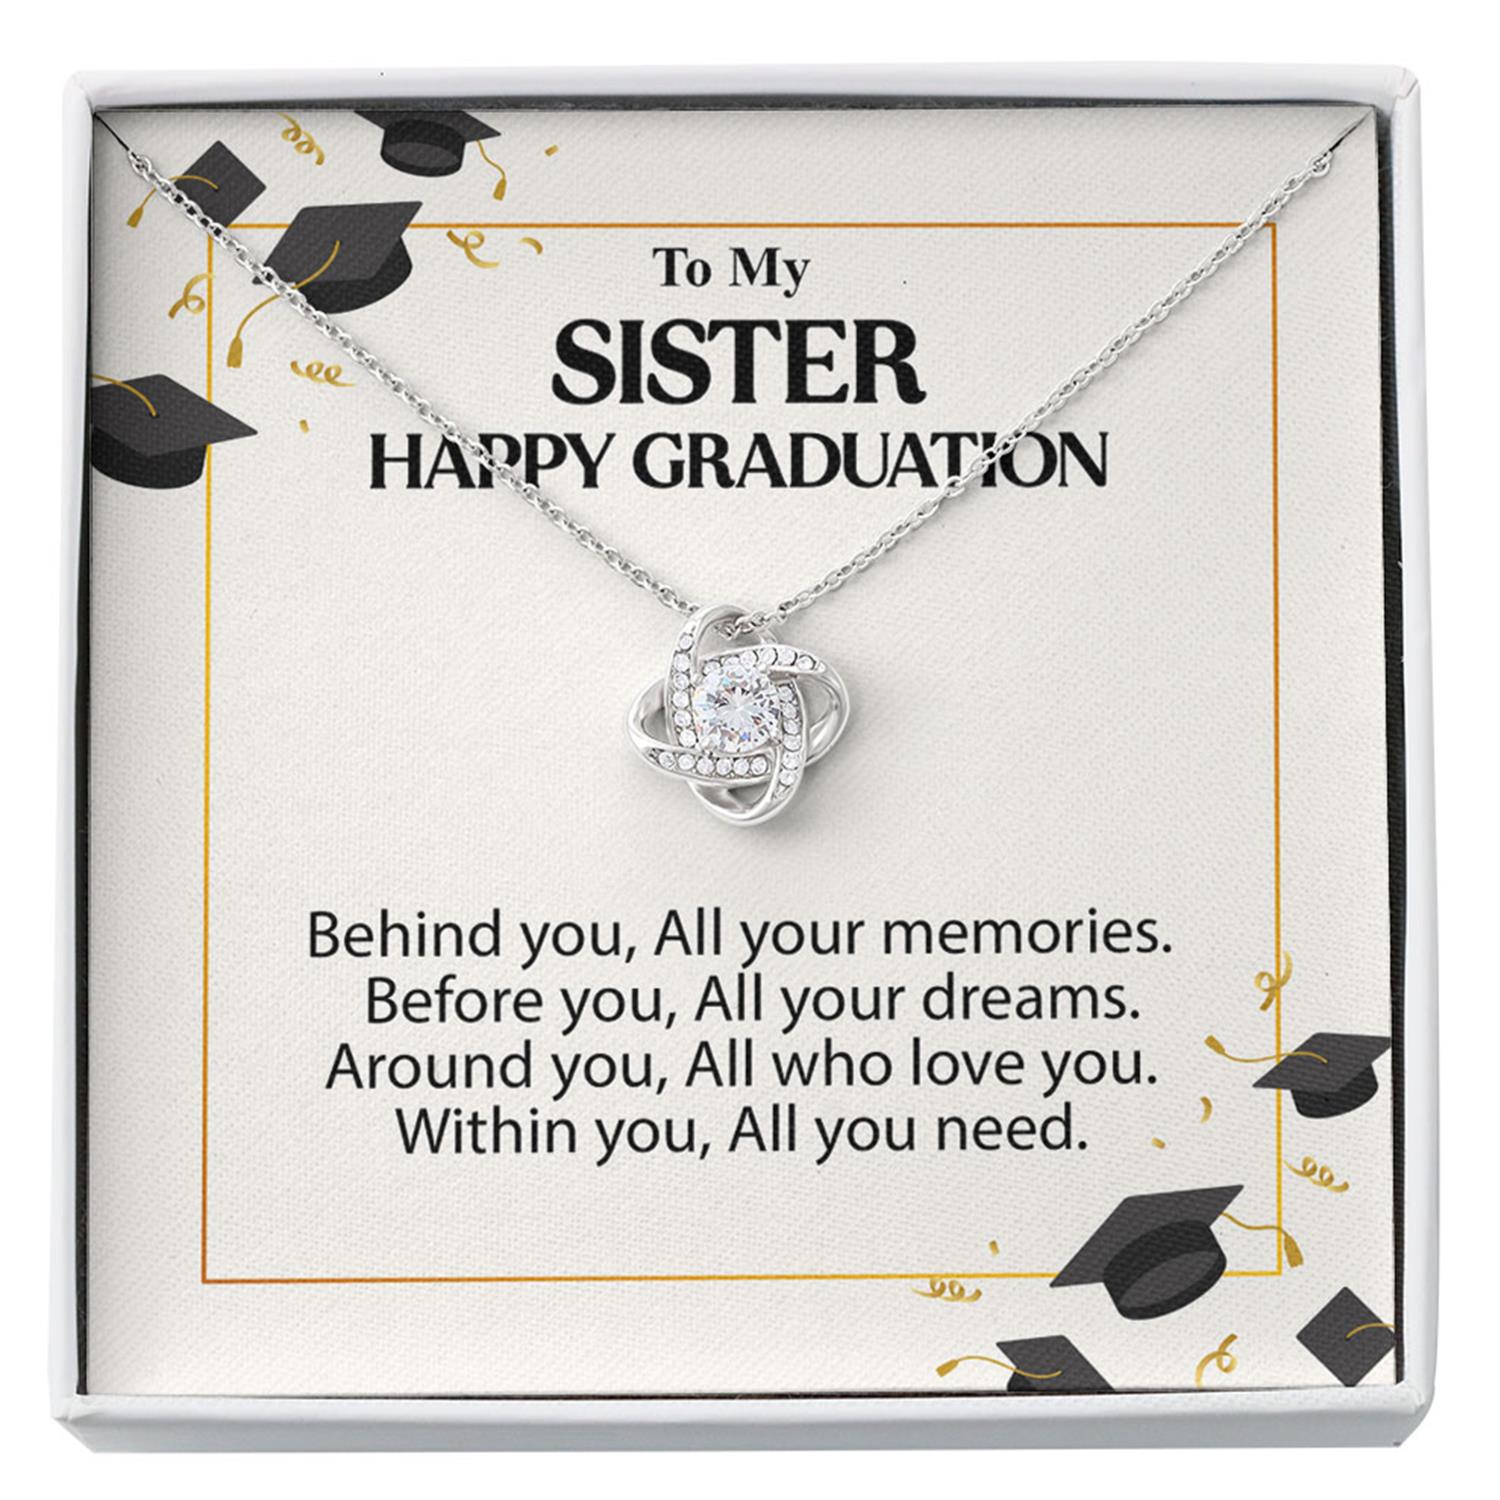 Sister Necklace, To My Sister Necklace Graduation Gift - Within You All You Need Custom Necklace